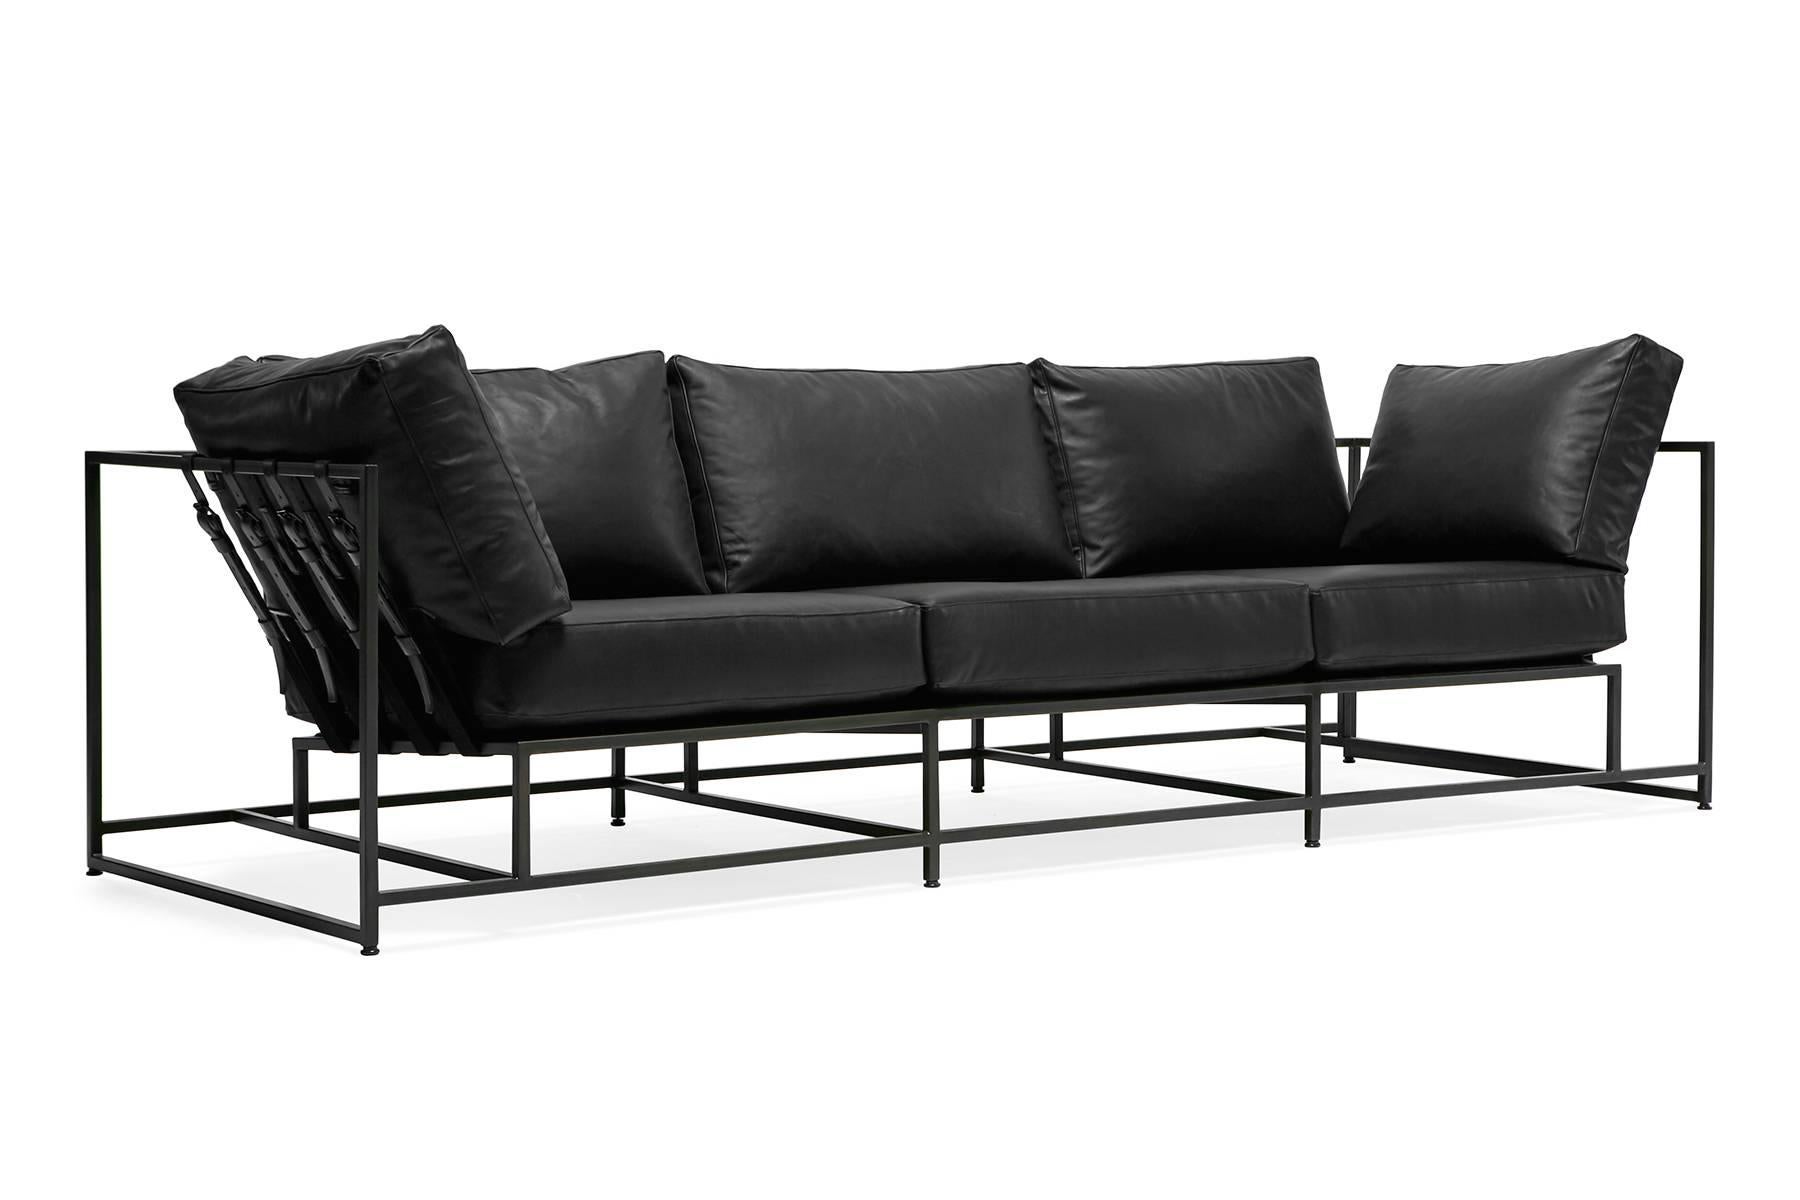 
The Inheritance Sofa by Stephen Kenn is as comfortable as it is unique. The design features an exposed construction composed of three elements - a steel frame, plush upholstery, and supportive belts. The deep seating area is perfect for a relaxing